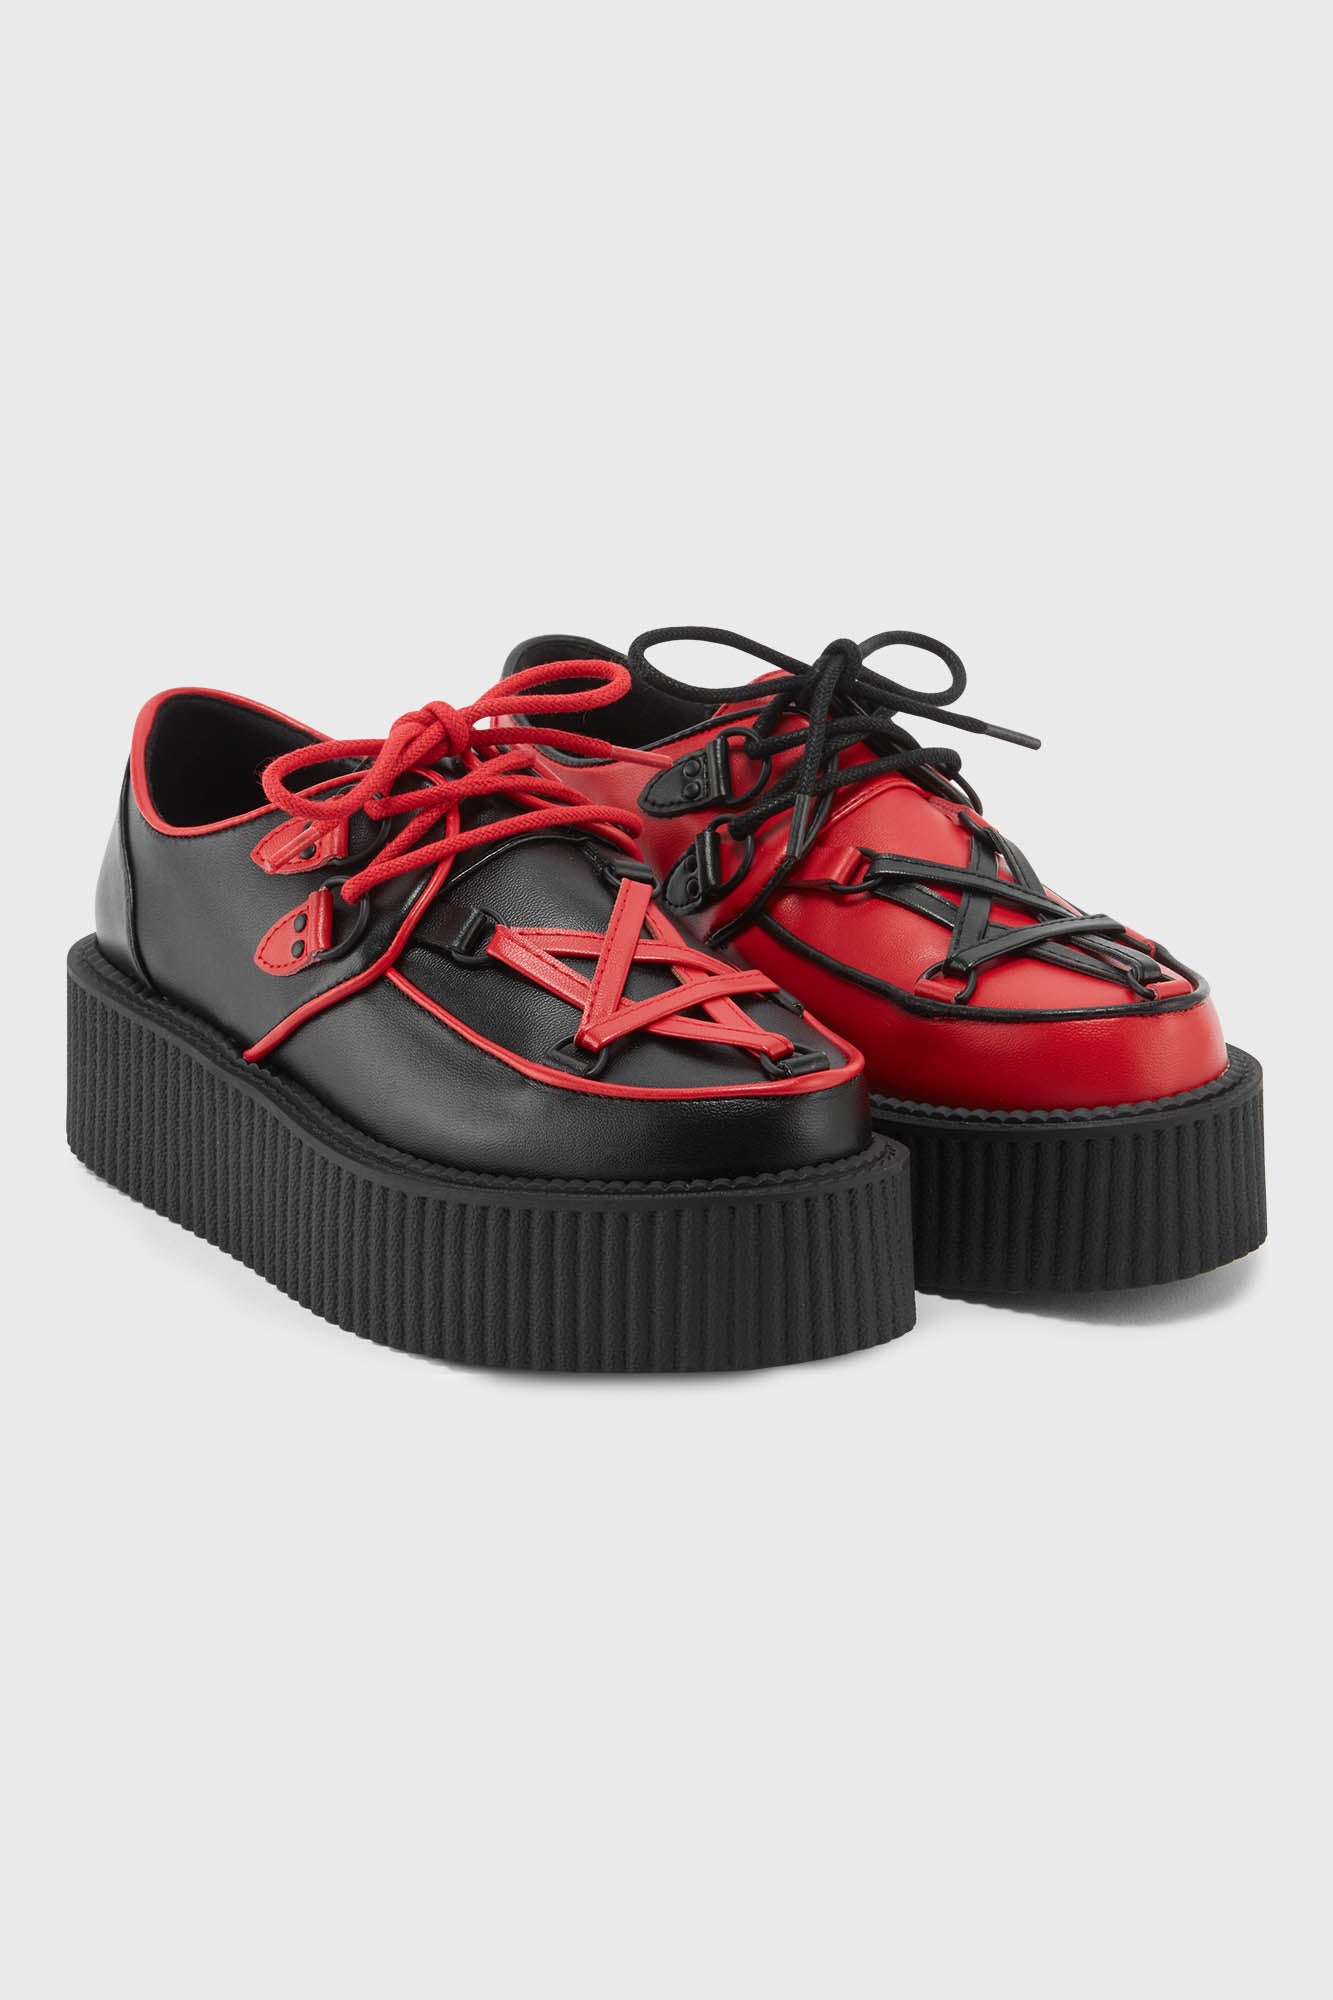 Here at buy Hexellent Creepers [BLACK/RED] Cheap